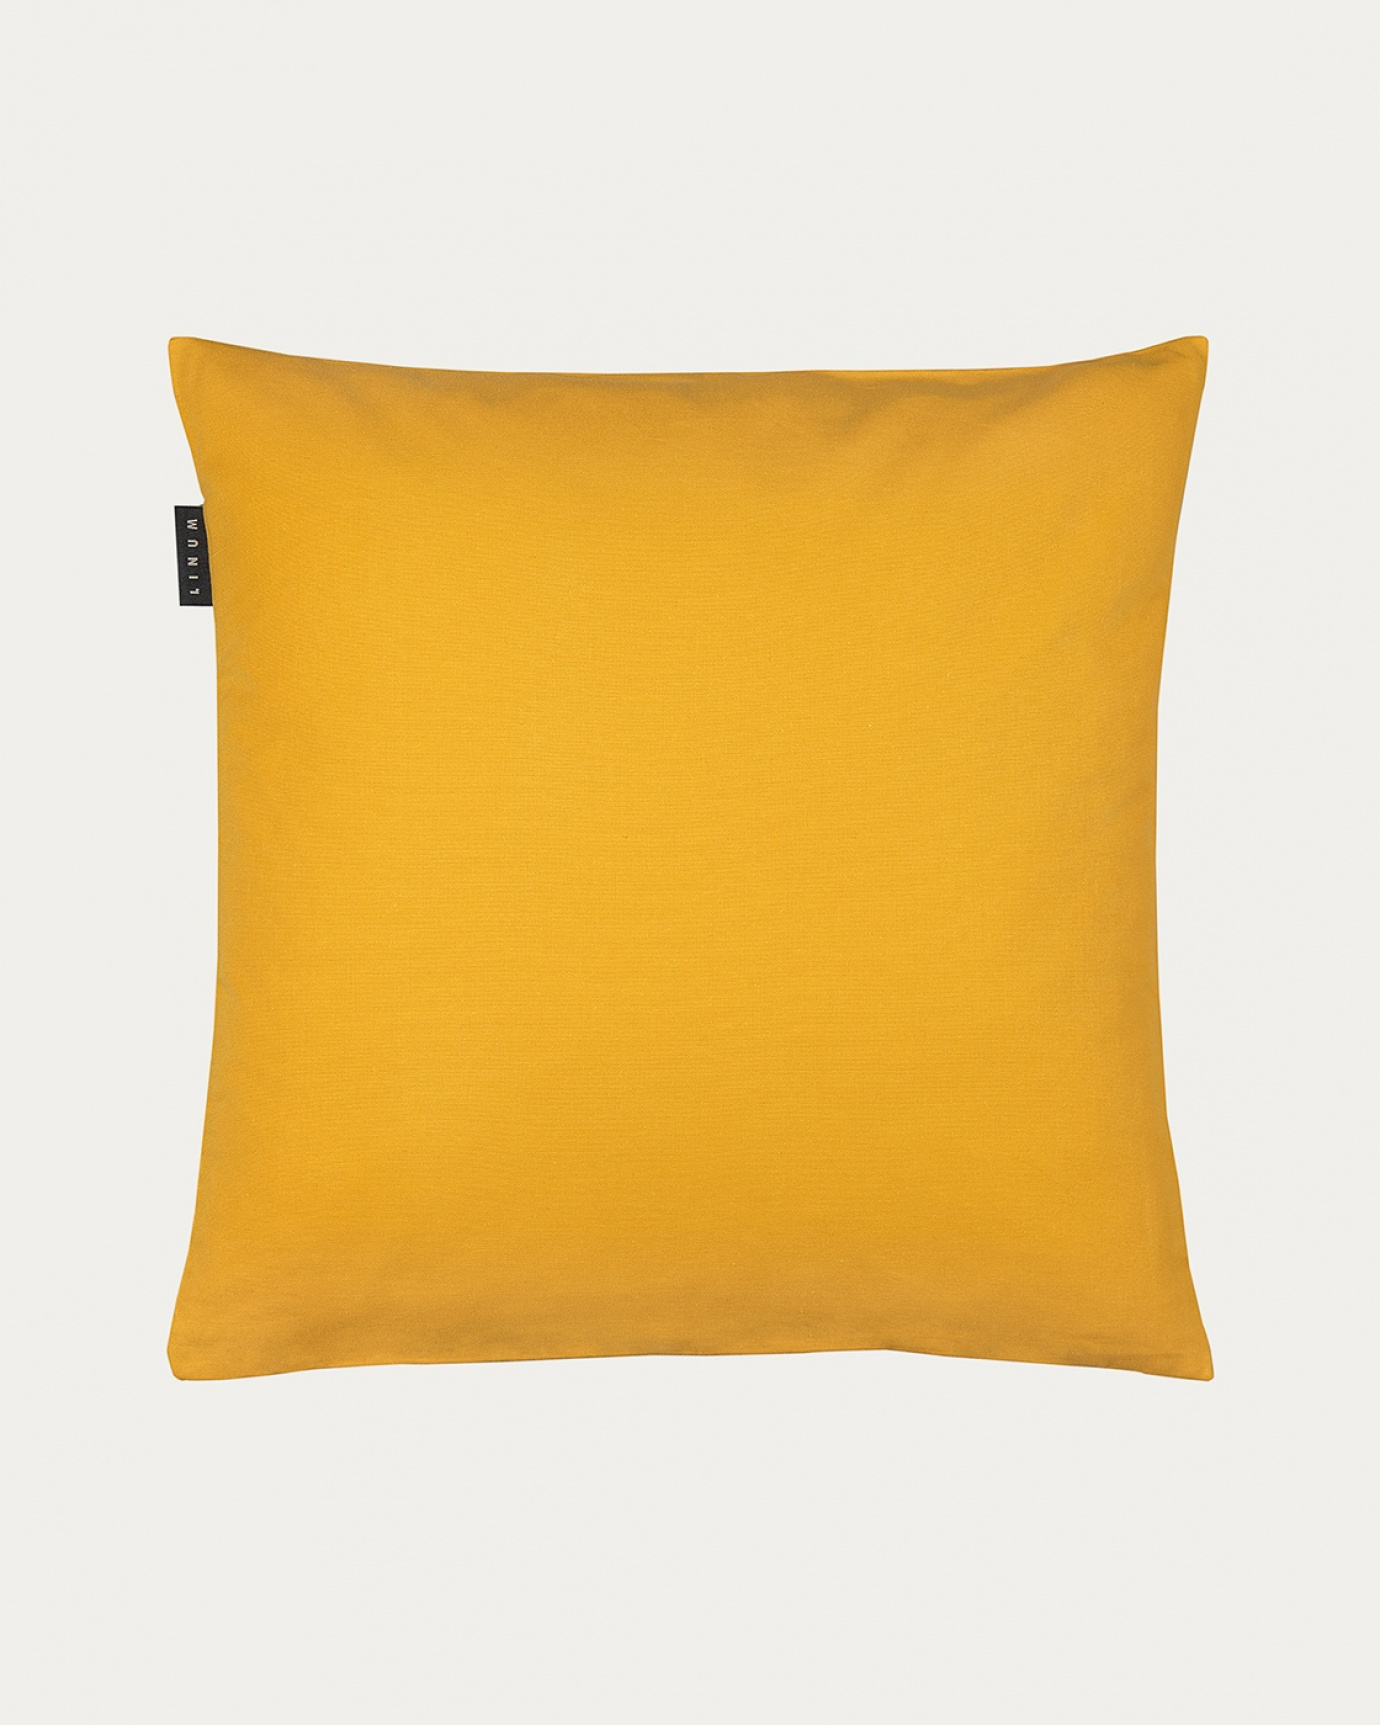 Product image tangerine yellow ANNABELL cushion cover made of soft cotton from LINUM DESIGN. Size 50x50 cm.